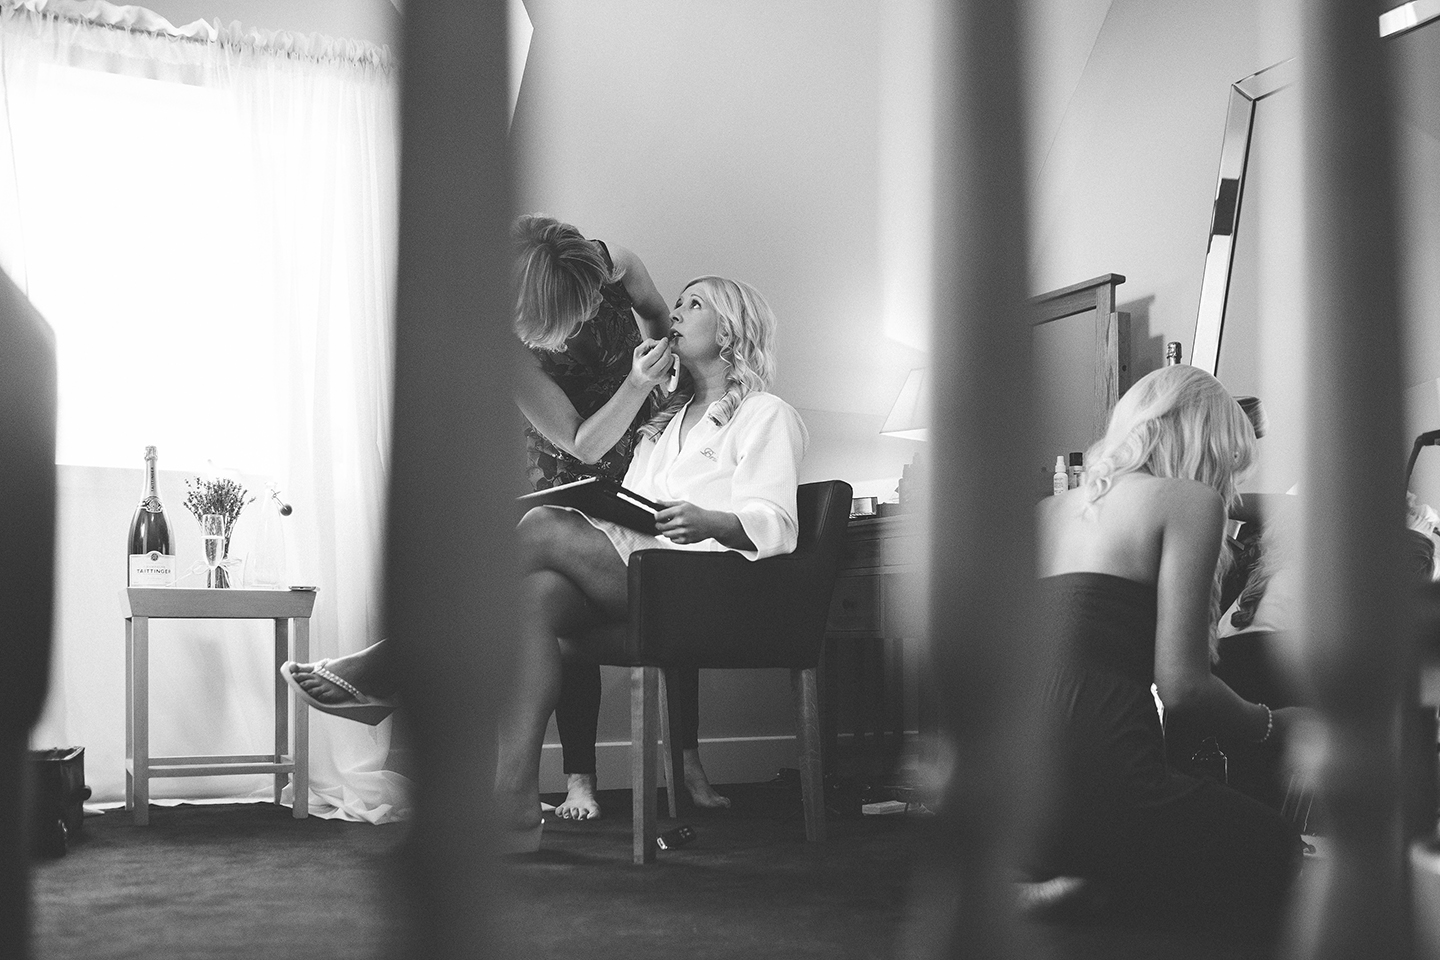 A bride gets ready in the Bridal Boudoir at this barn wedding venue in Cambridgeshire